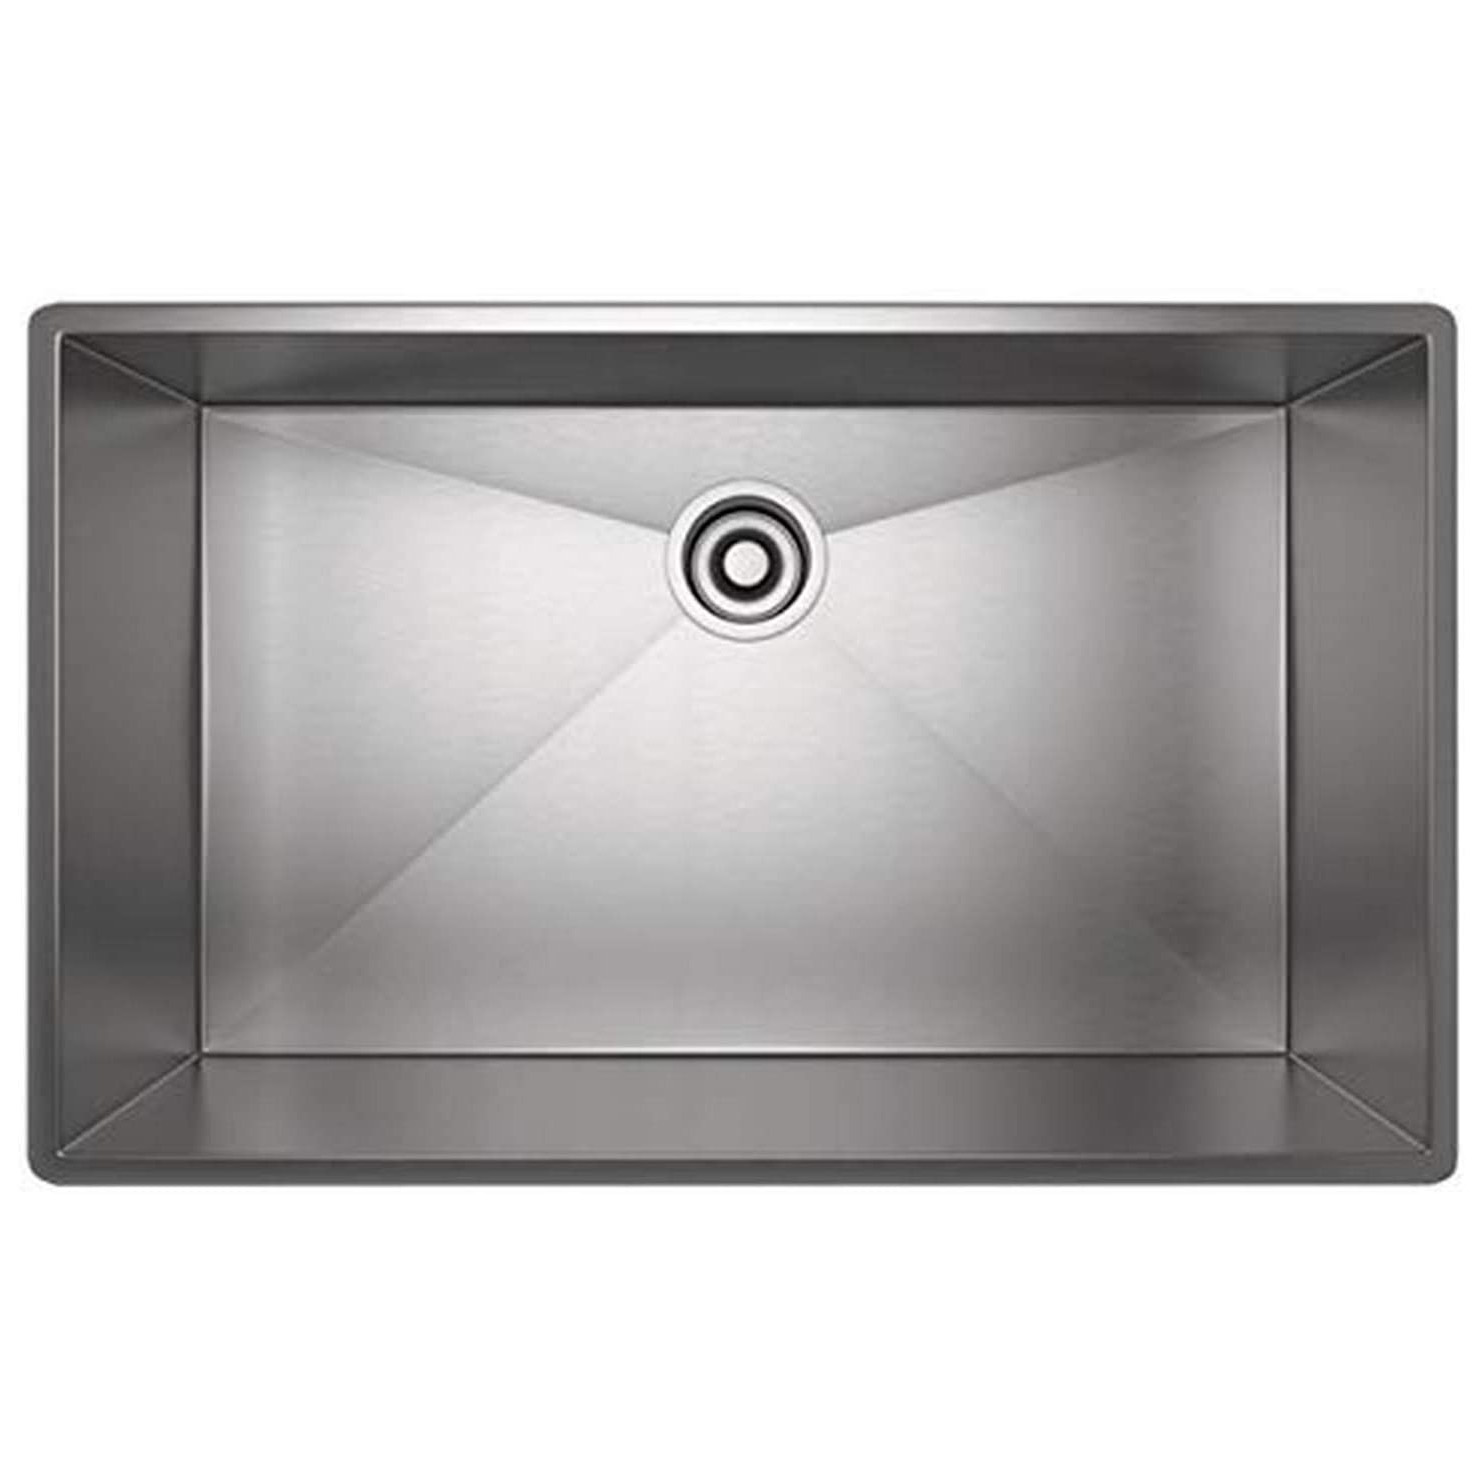 Forze 31-1/2x19-1/2x10" Kitchen Sink in Brushed Stainless